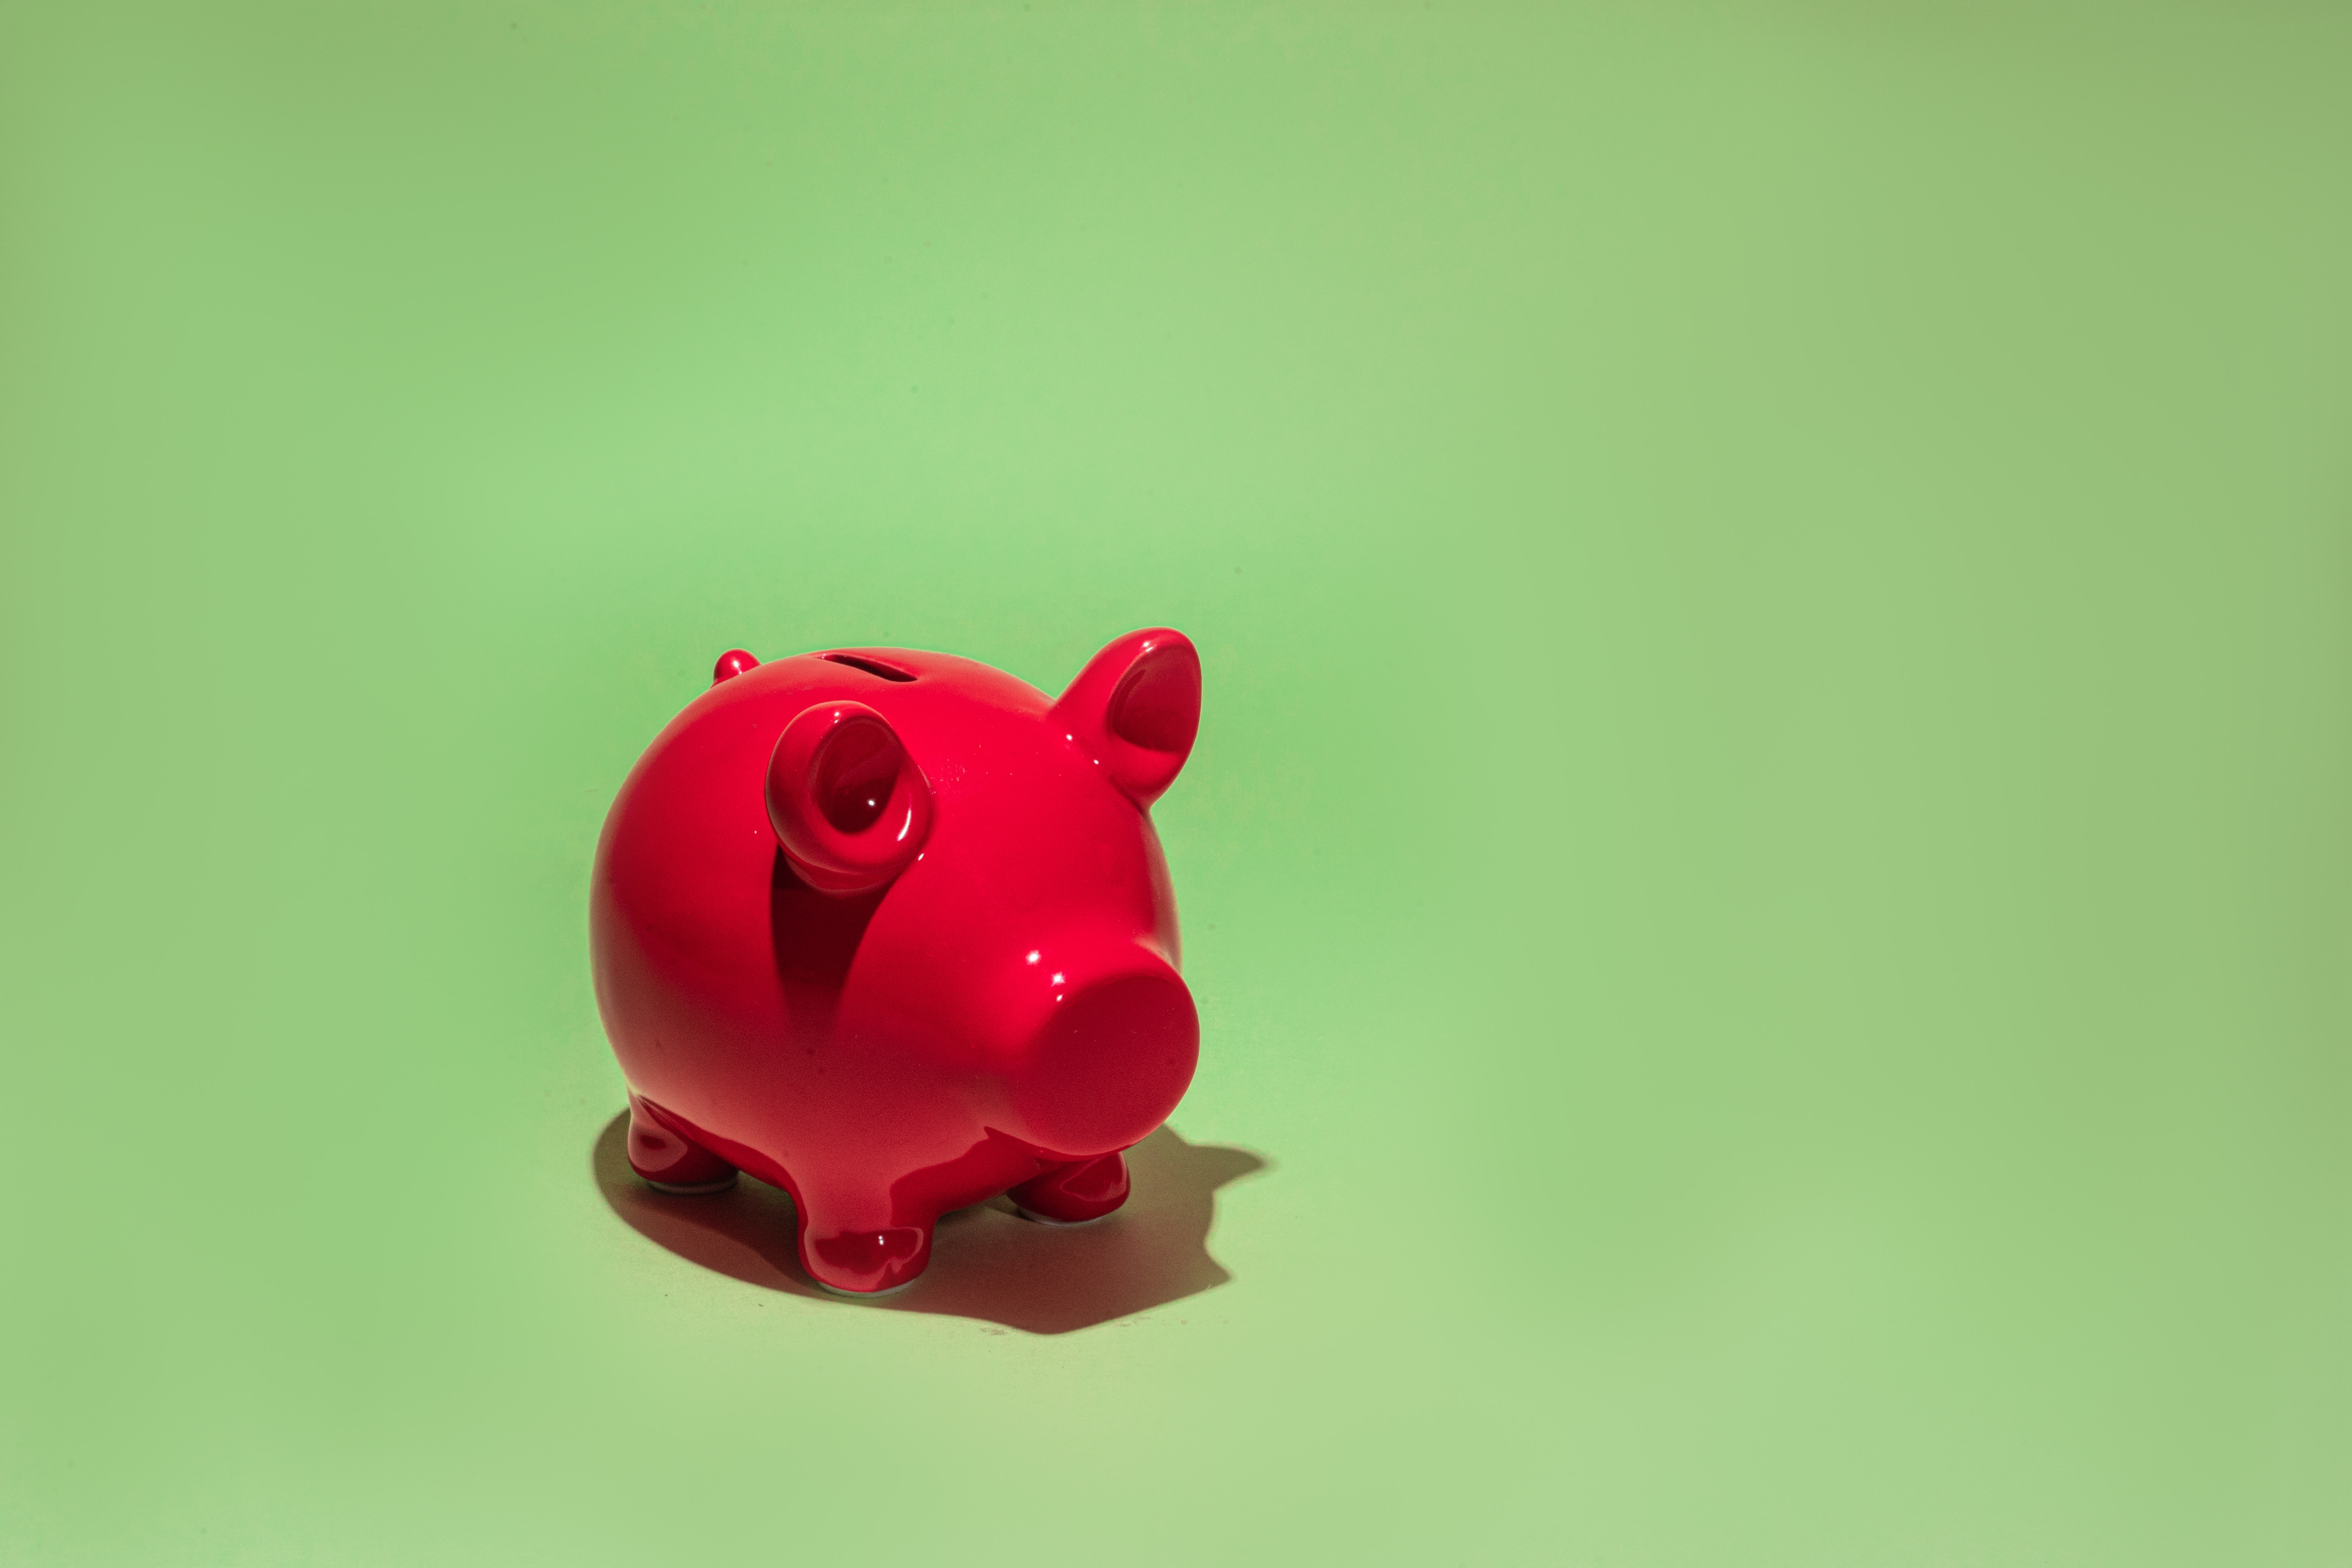 This image is of a Red piggy bank, and the background of the image is green.